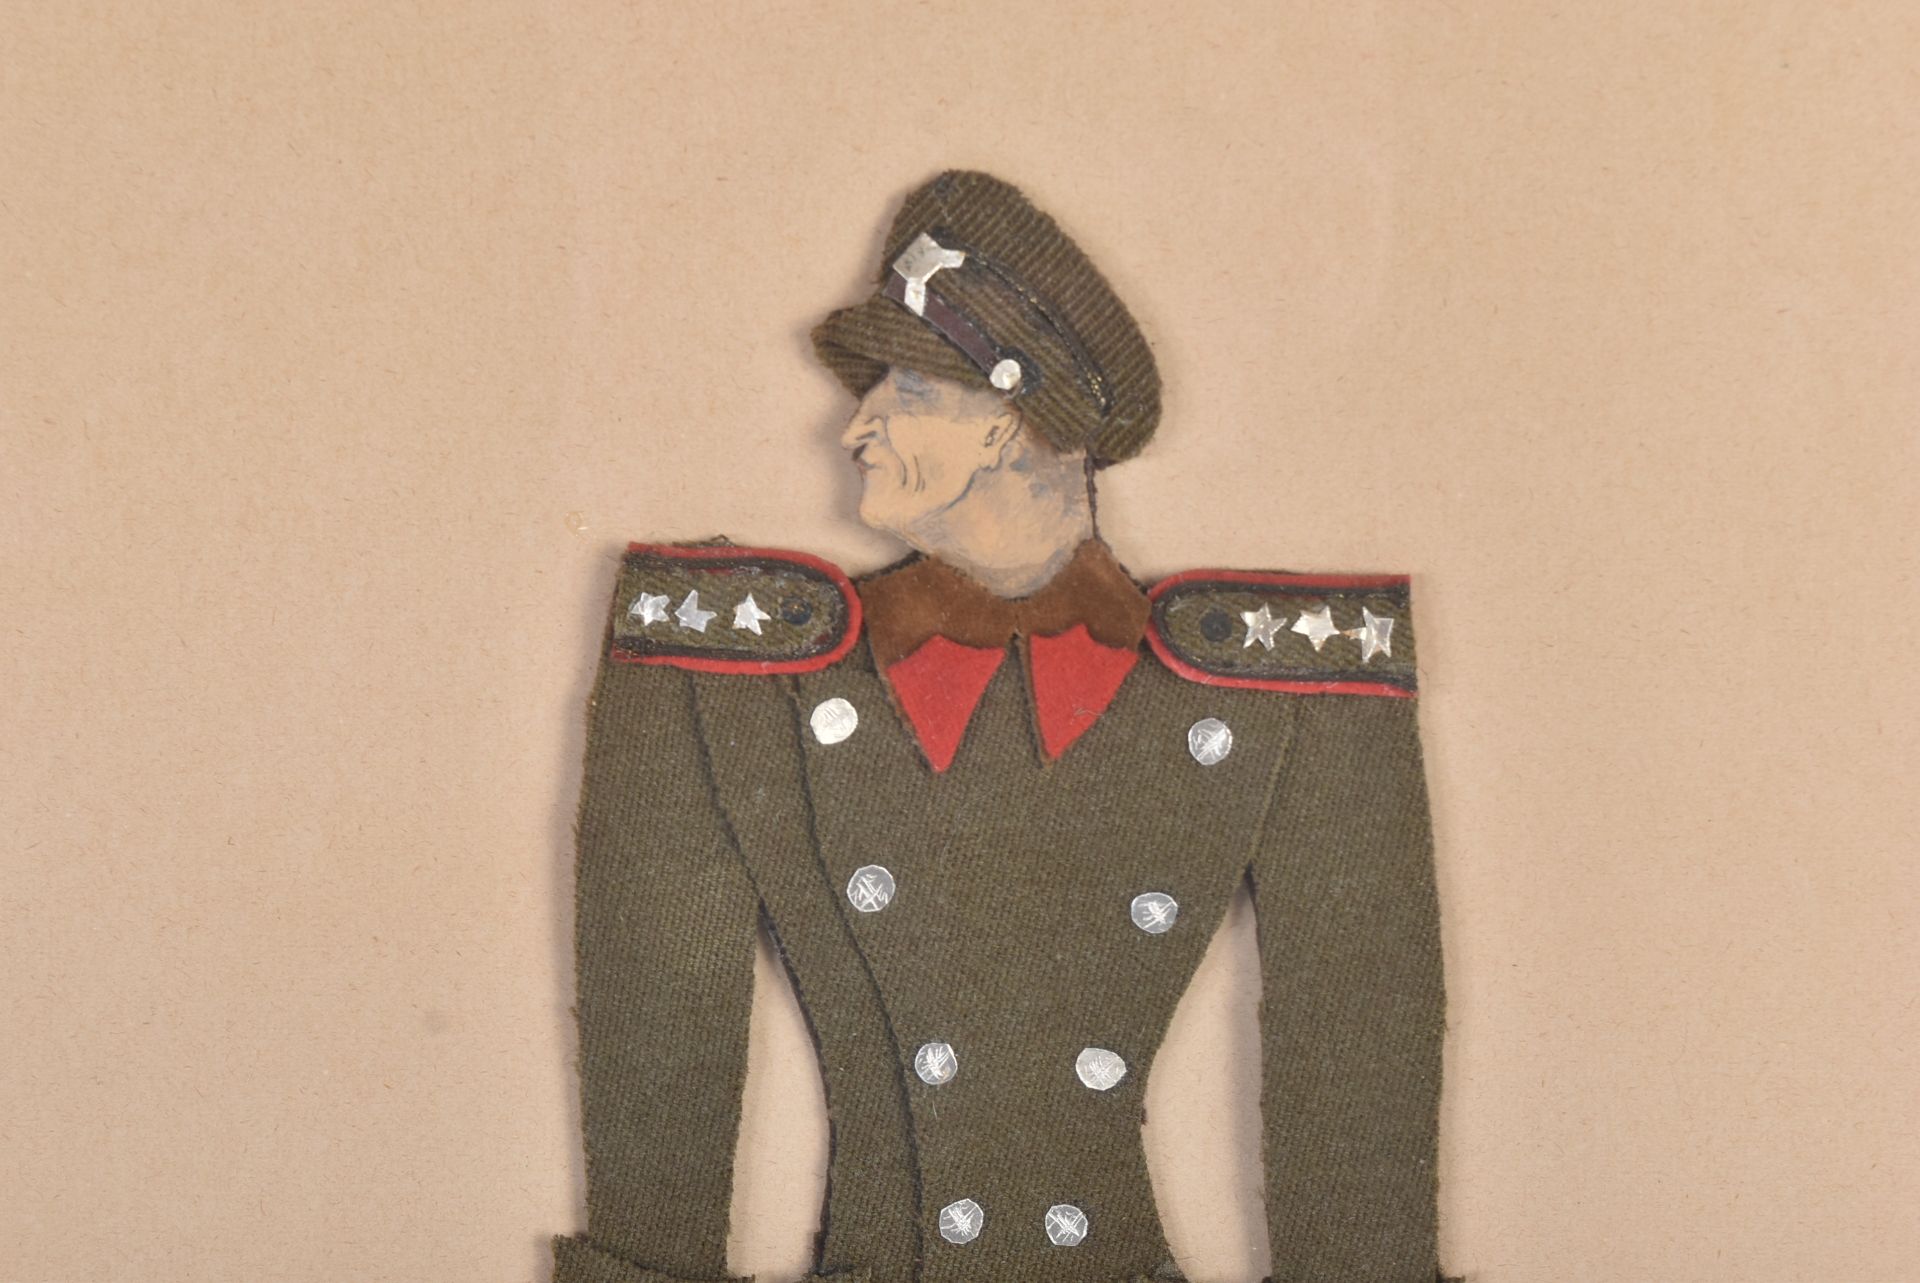 CARICATURE OF FERDINAND MIKSCHE IN CEZCH OFFICER'S UNIFORM - Image 2 of 5